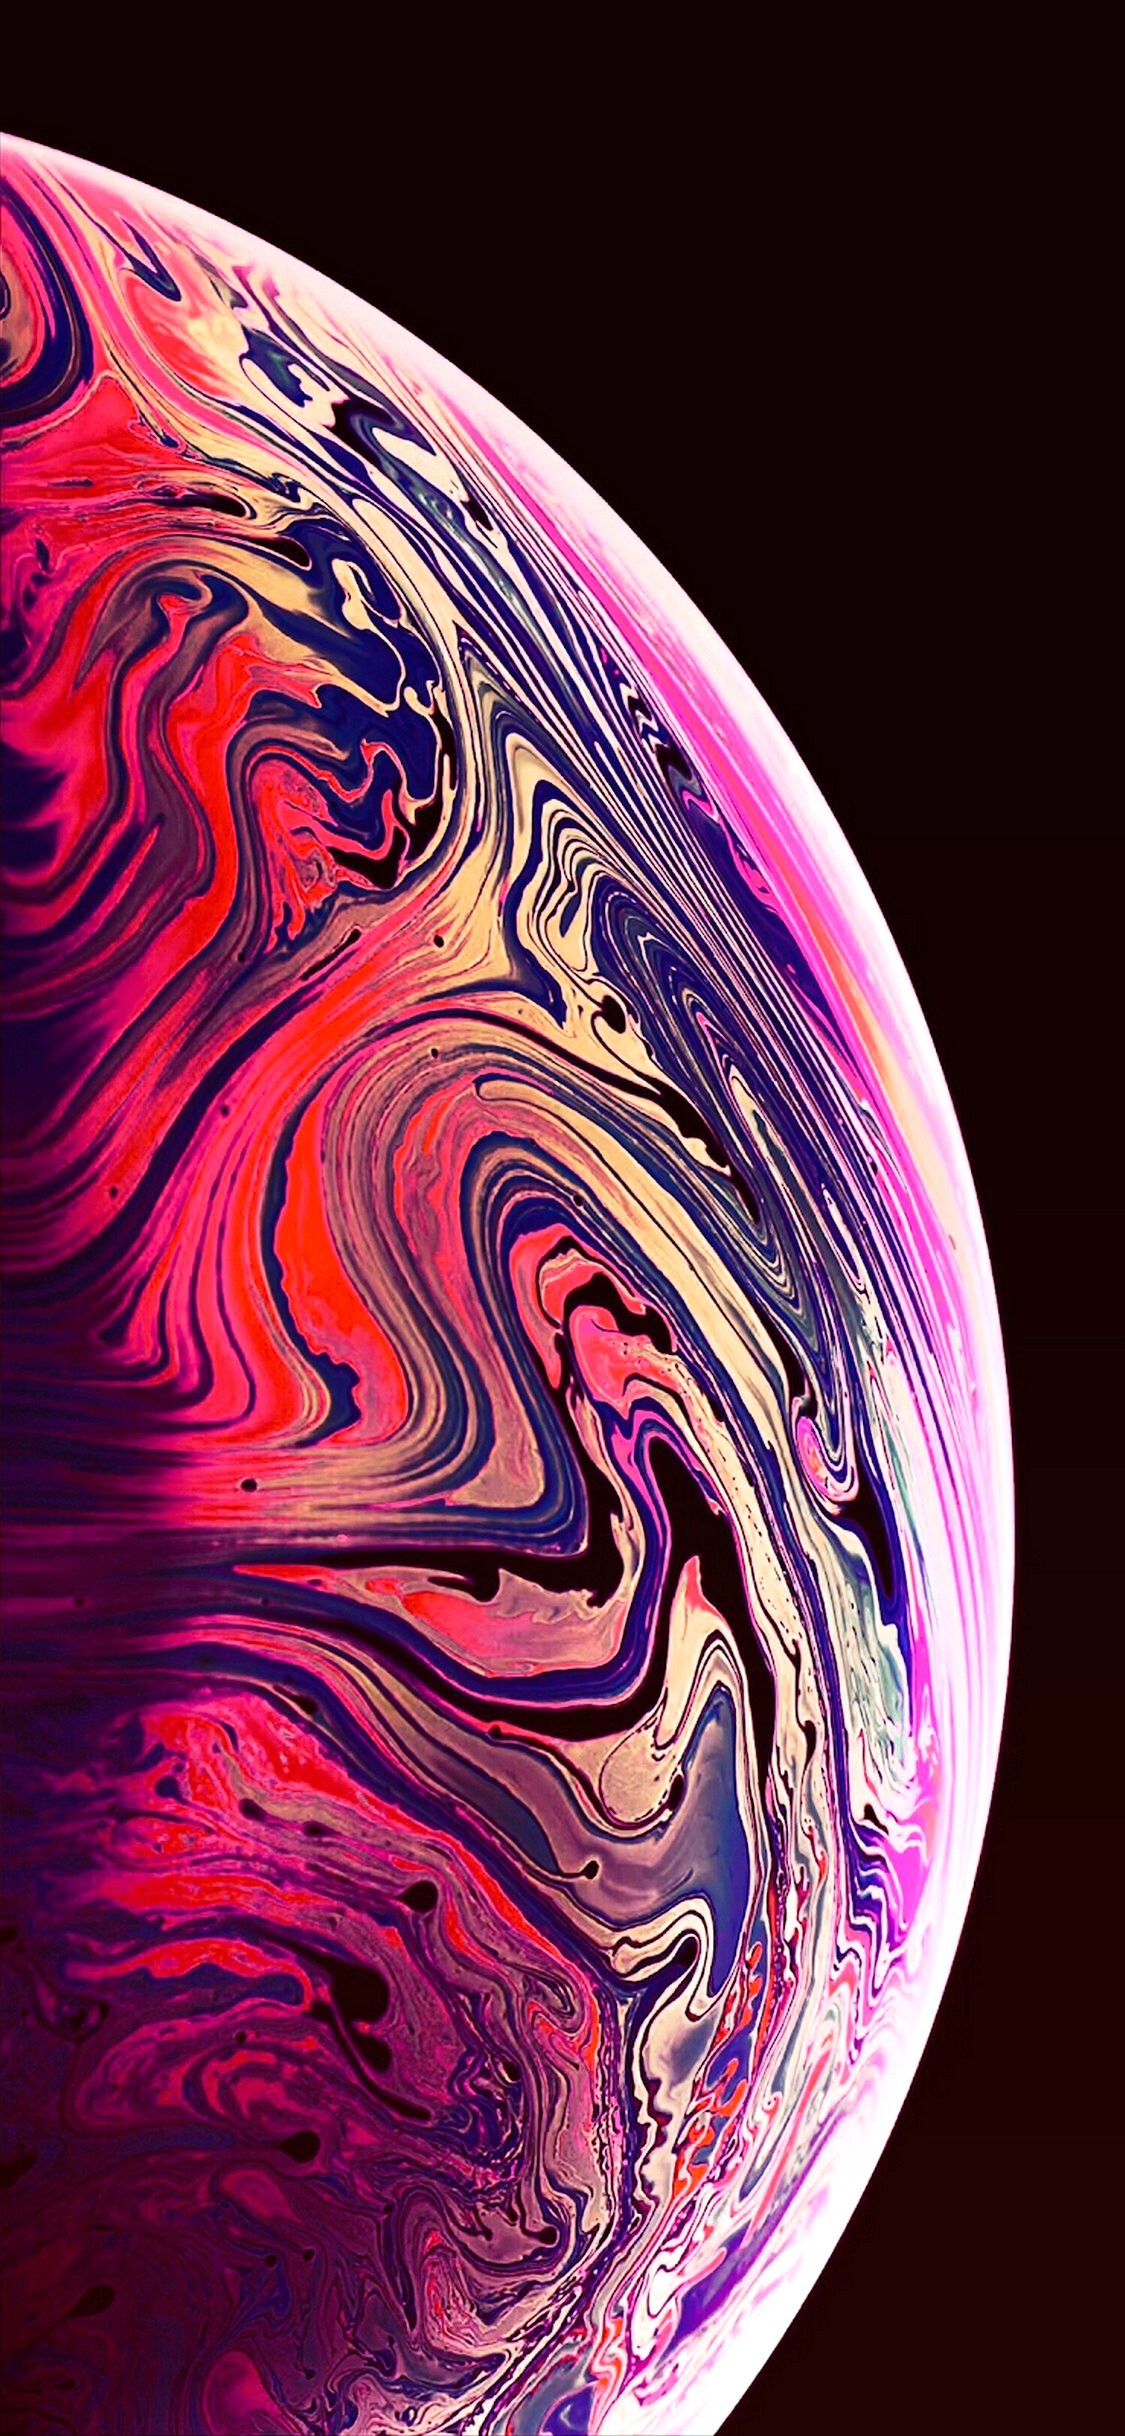 iPhone XS Wallpaper Home Screen with high-resolution 1125x2436 pixel. You can use this wallpaper for your iPhone 5, 6, 7, 8, X, XS, XR backgrounds, Mobile Screensaver, or iPad Lock Screen